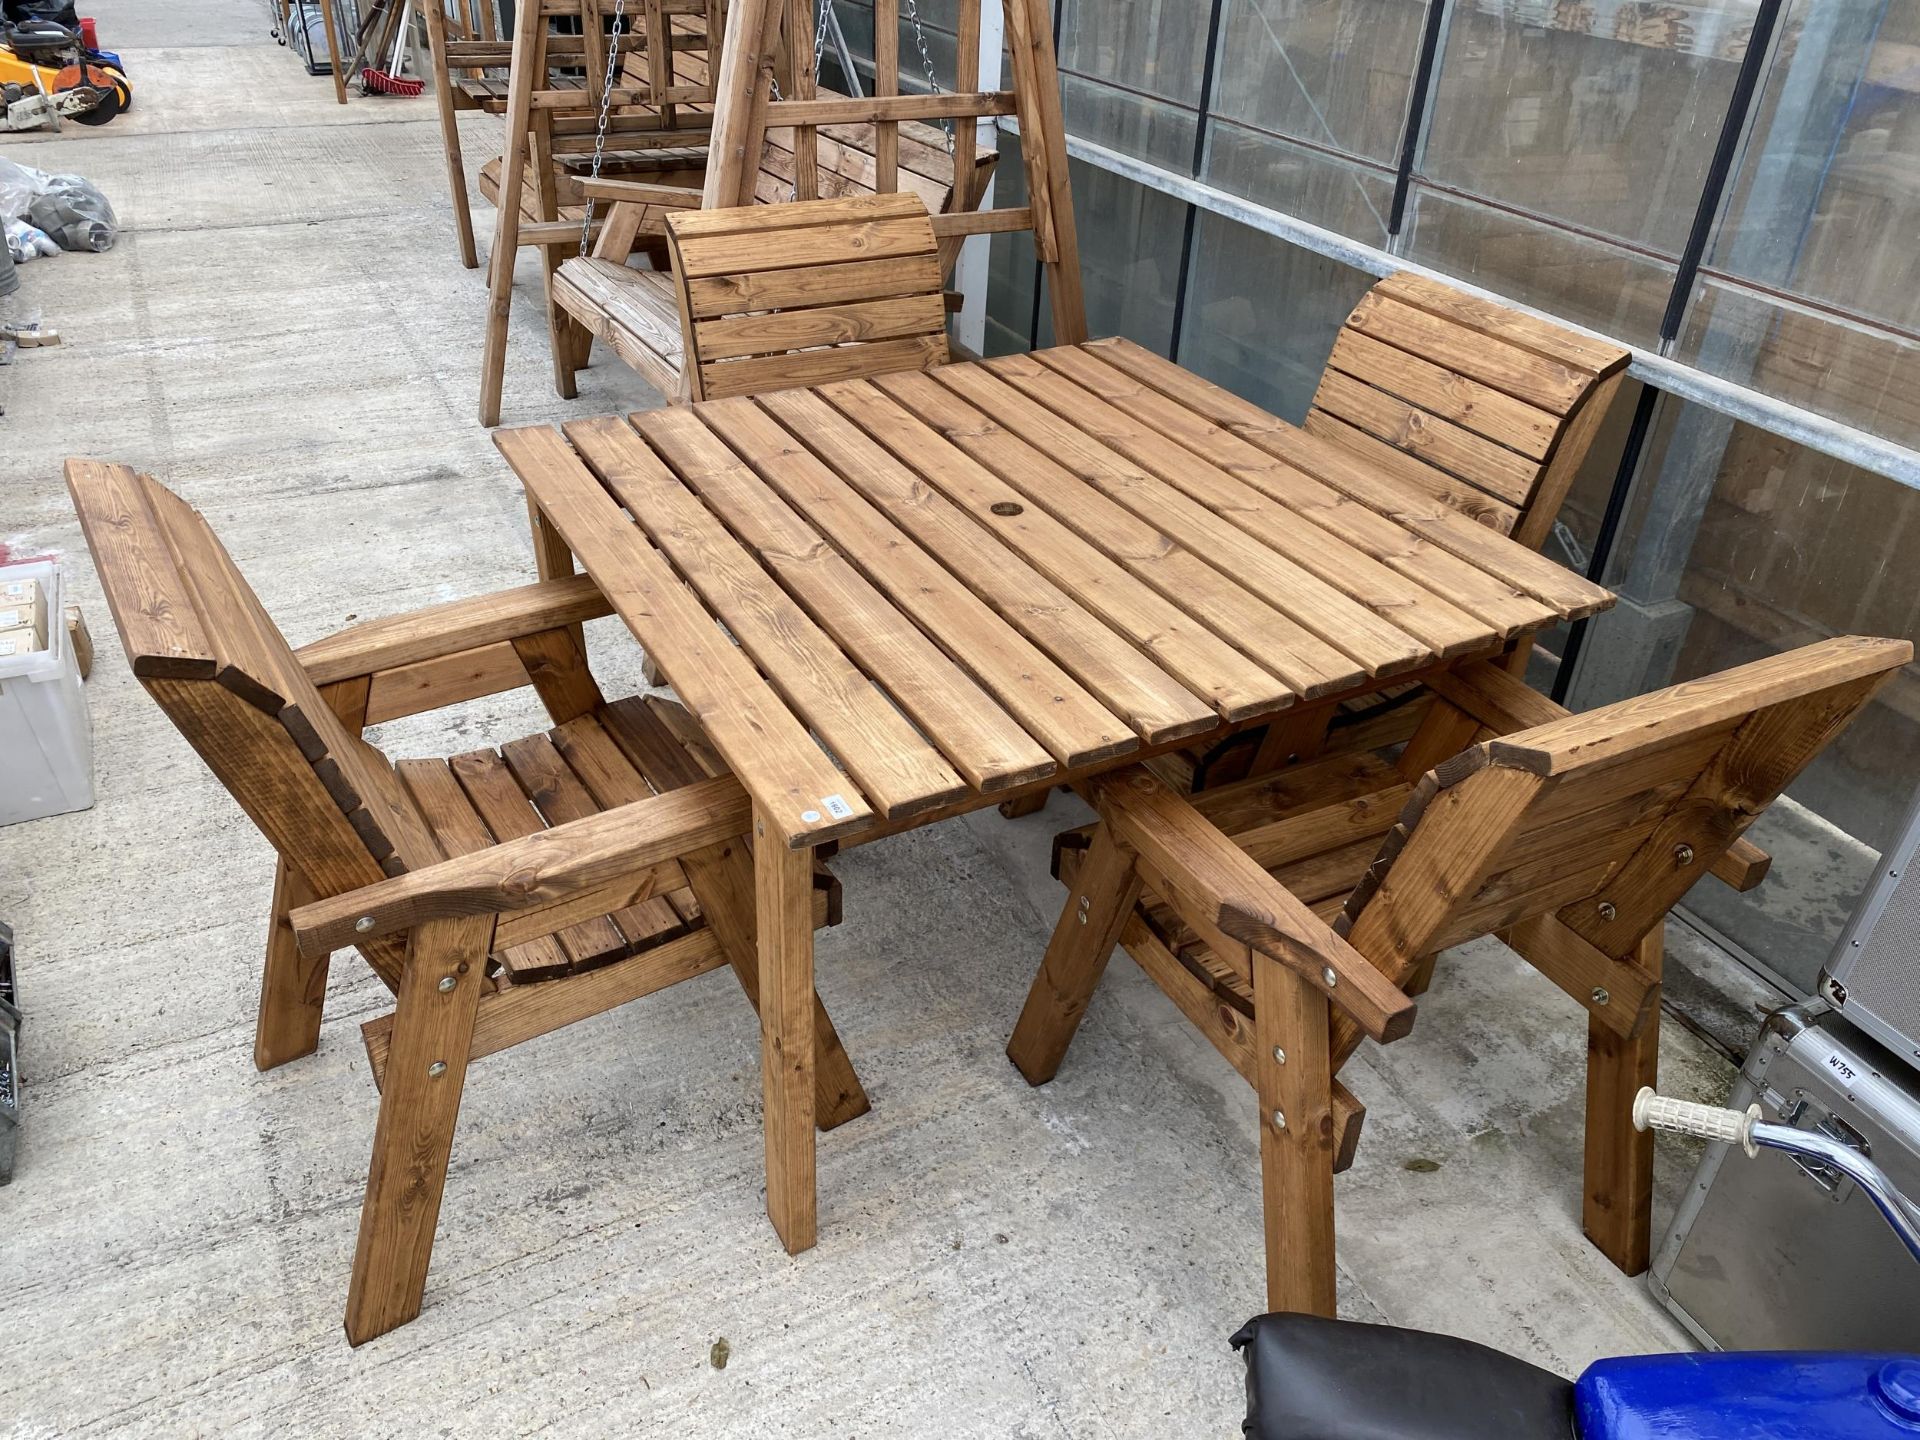 AN AS NEW EX DISPLAY CHARLES TAYLOR PATIO SET COMPRISING OF A SQUARE TABLE AND FOUR CHAIRS